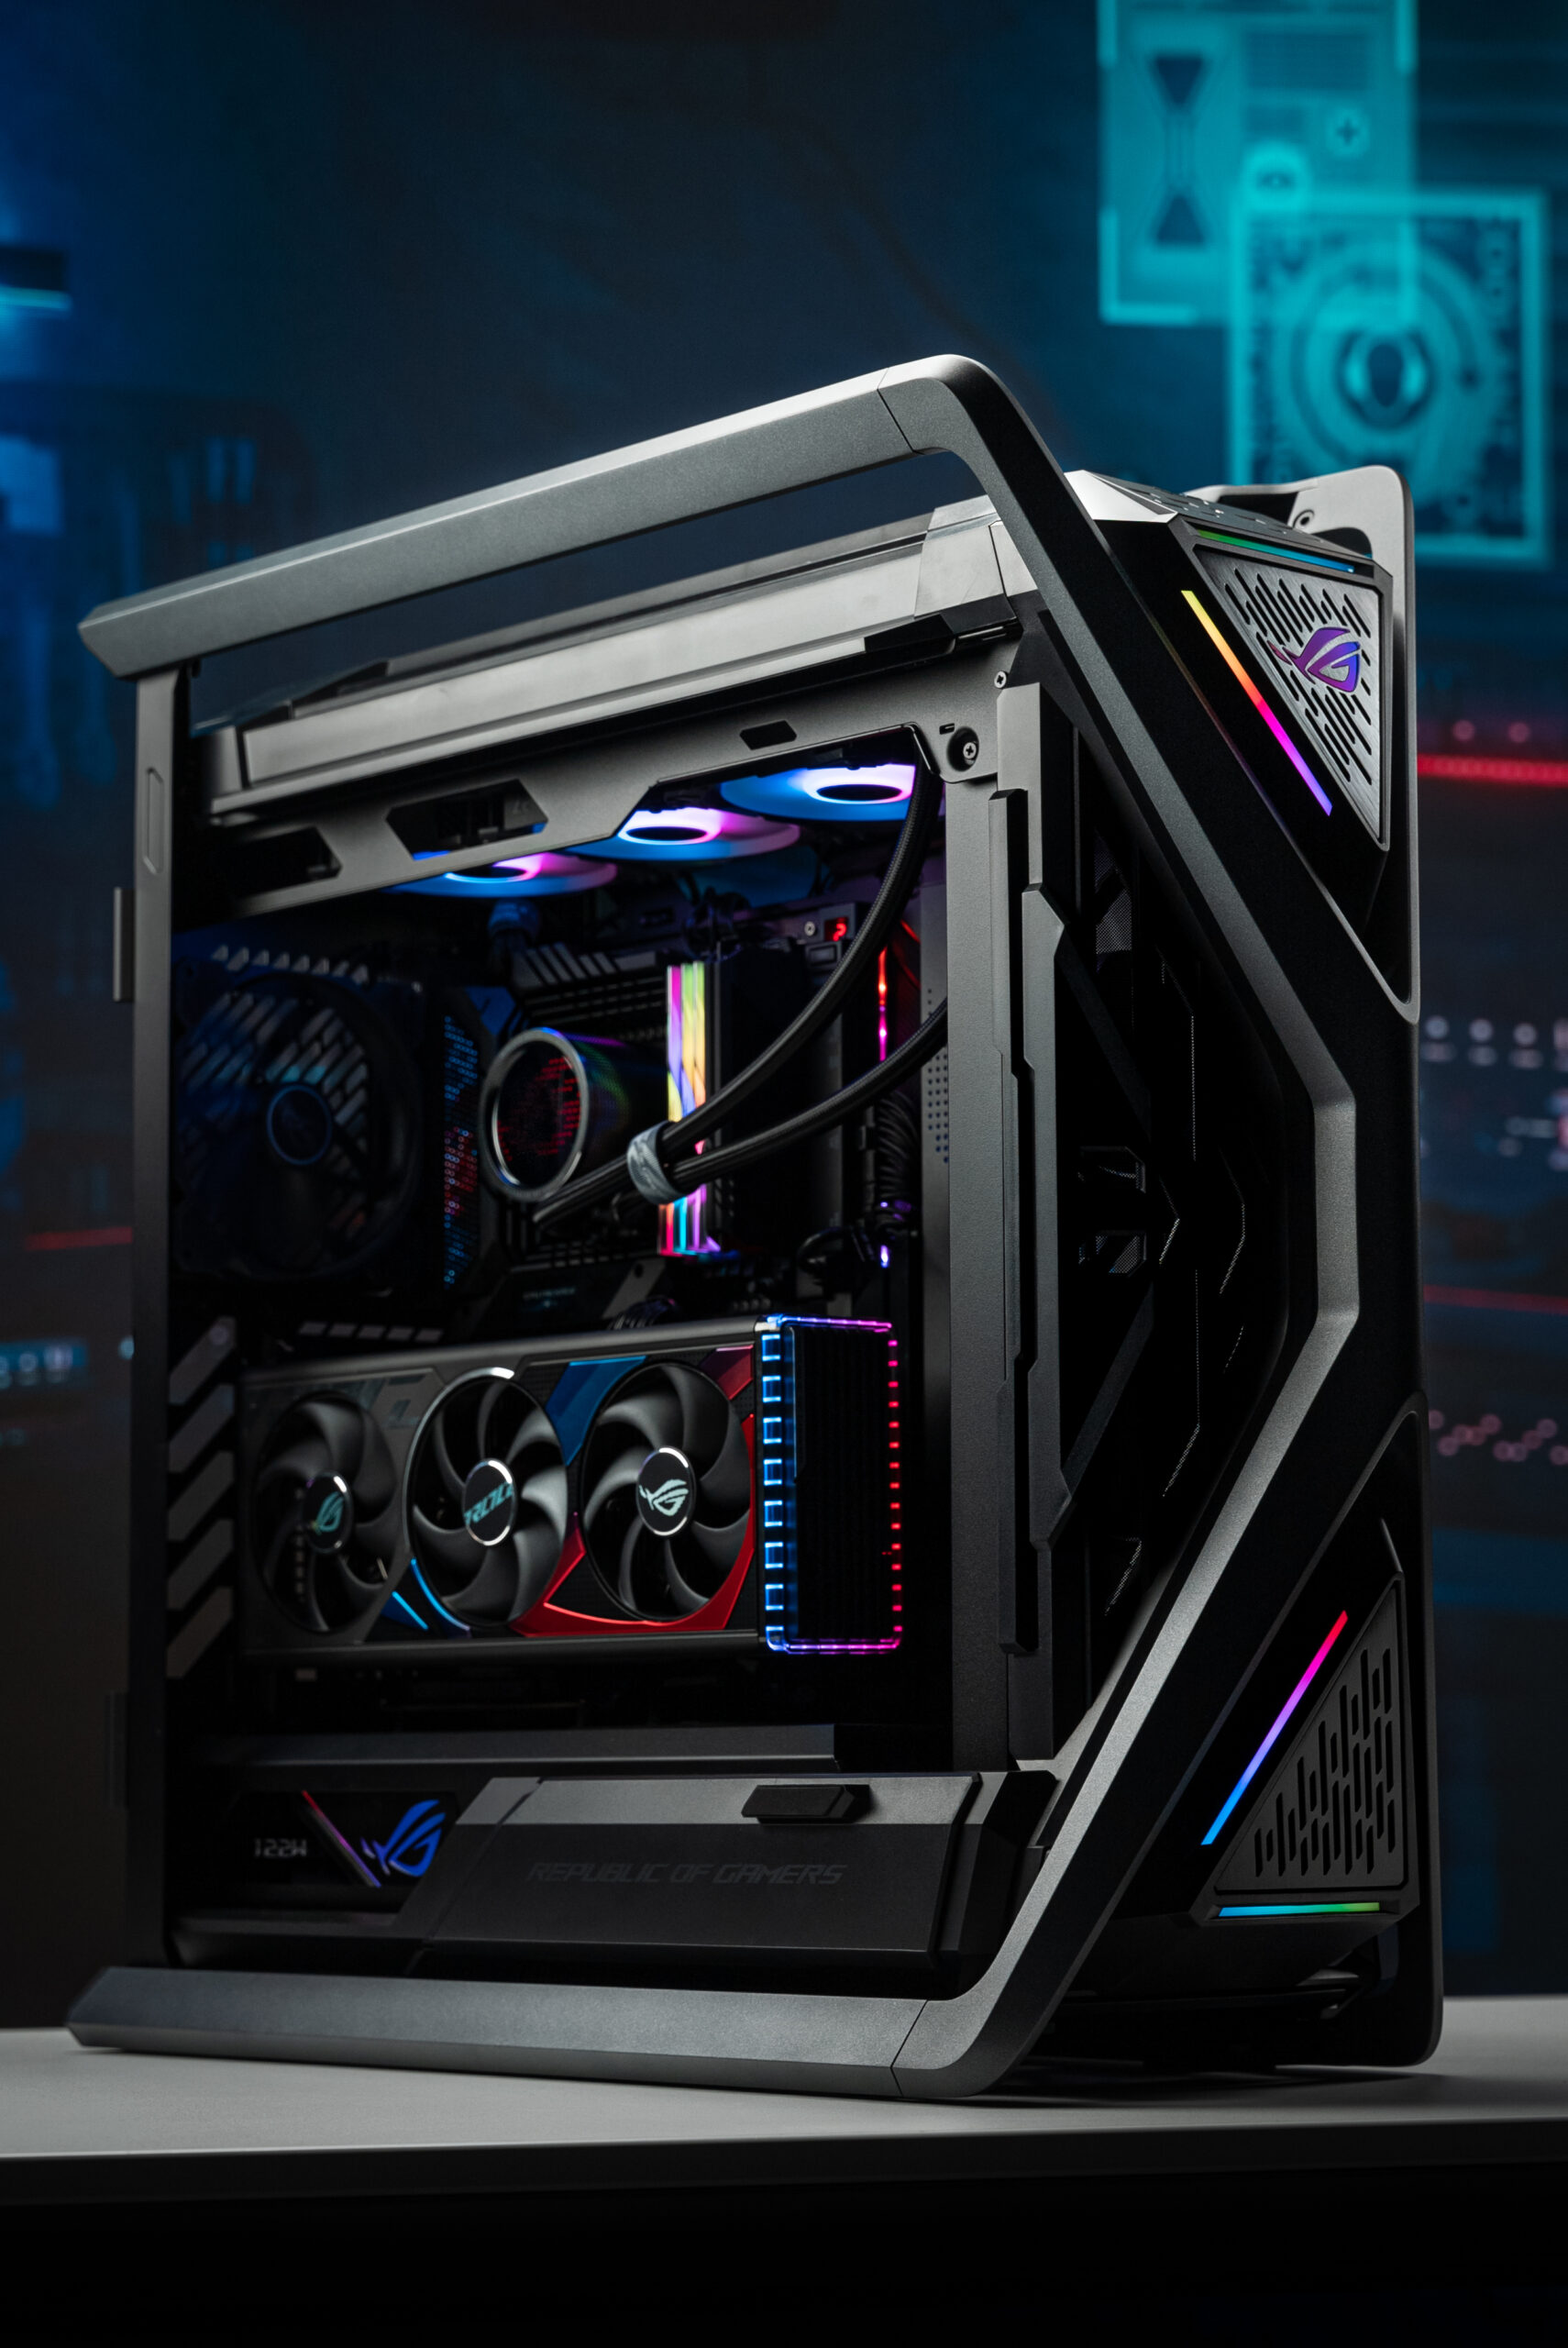 ASUS Republic of Gamers Announces Hyperion GR701 Full-Tower Gaming 